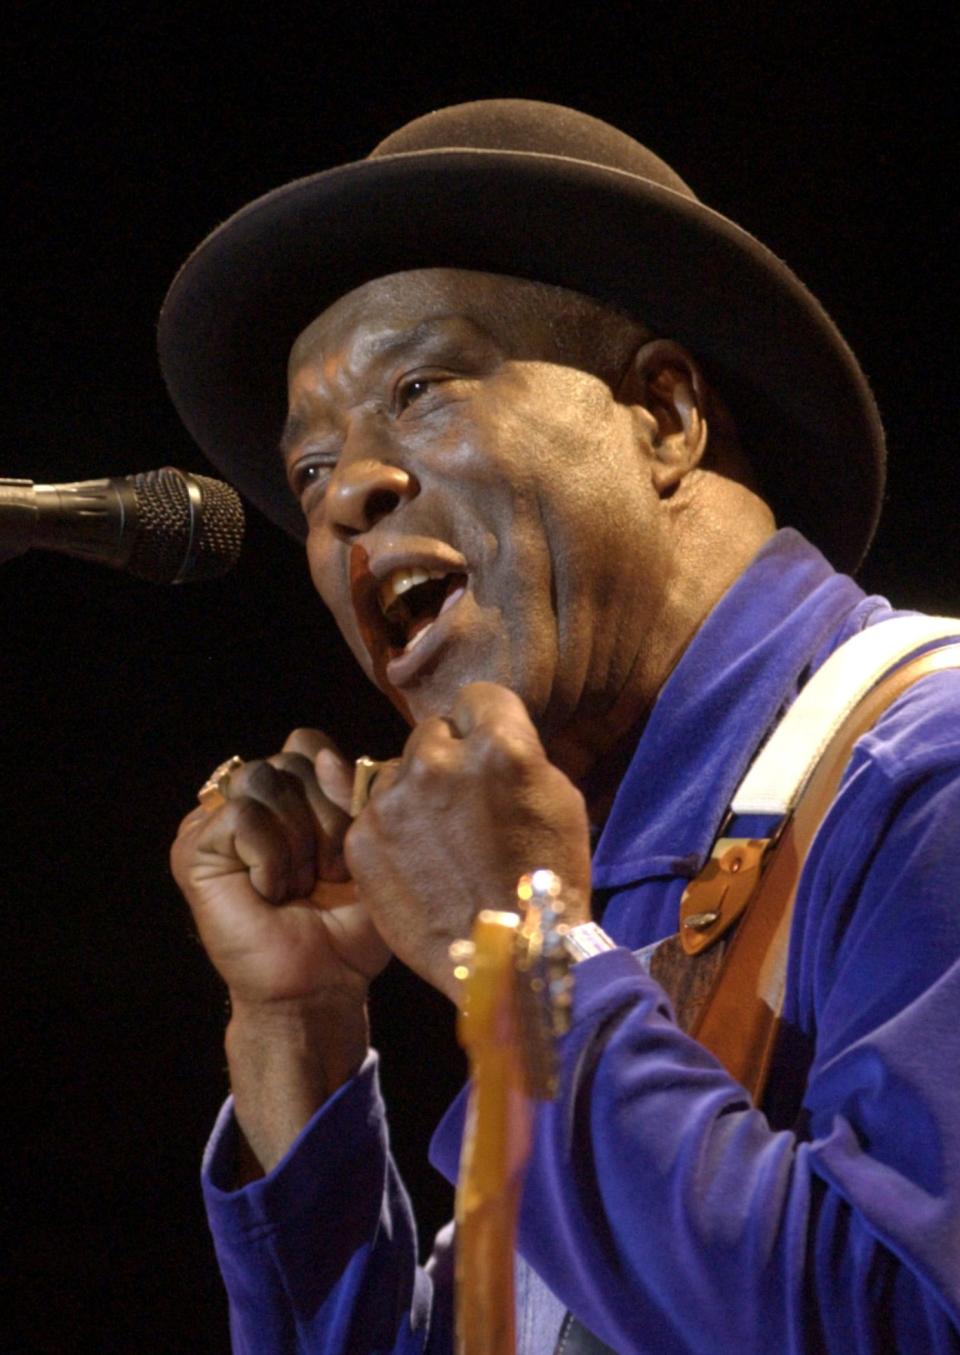 Buddy Guy gives the audience some impassioned vocals during his performance in Savannah on March 18, 2005.